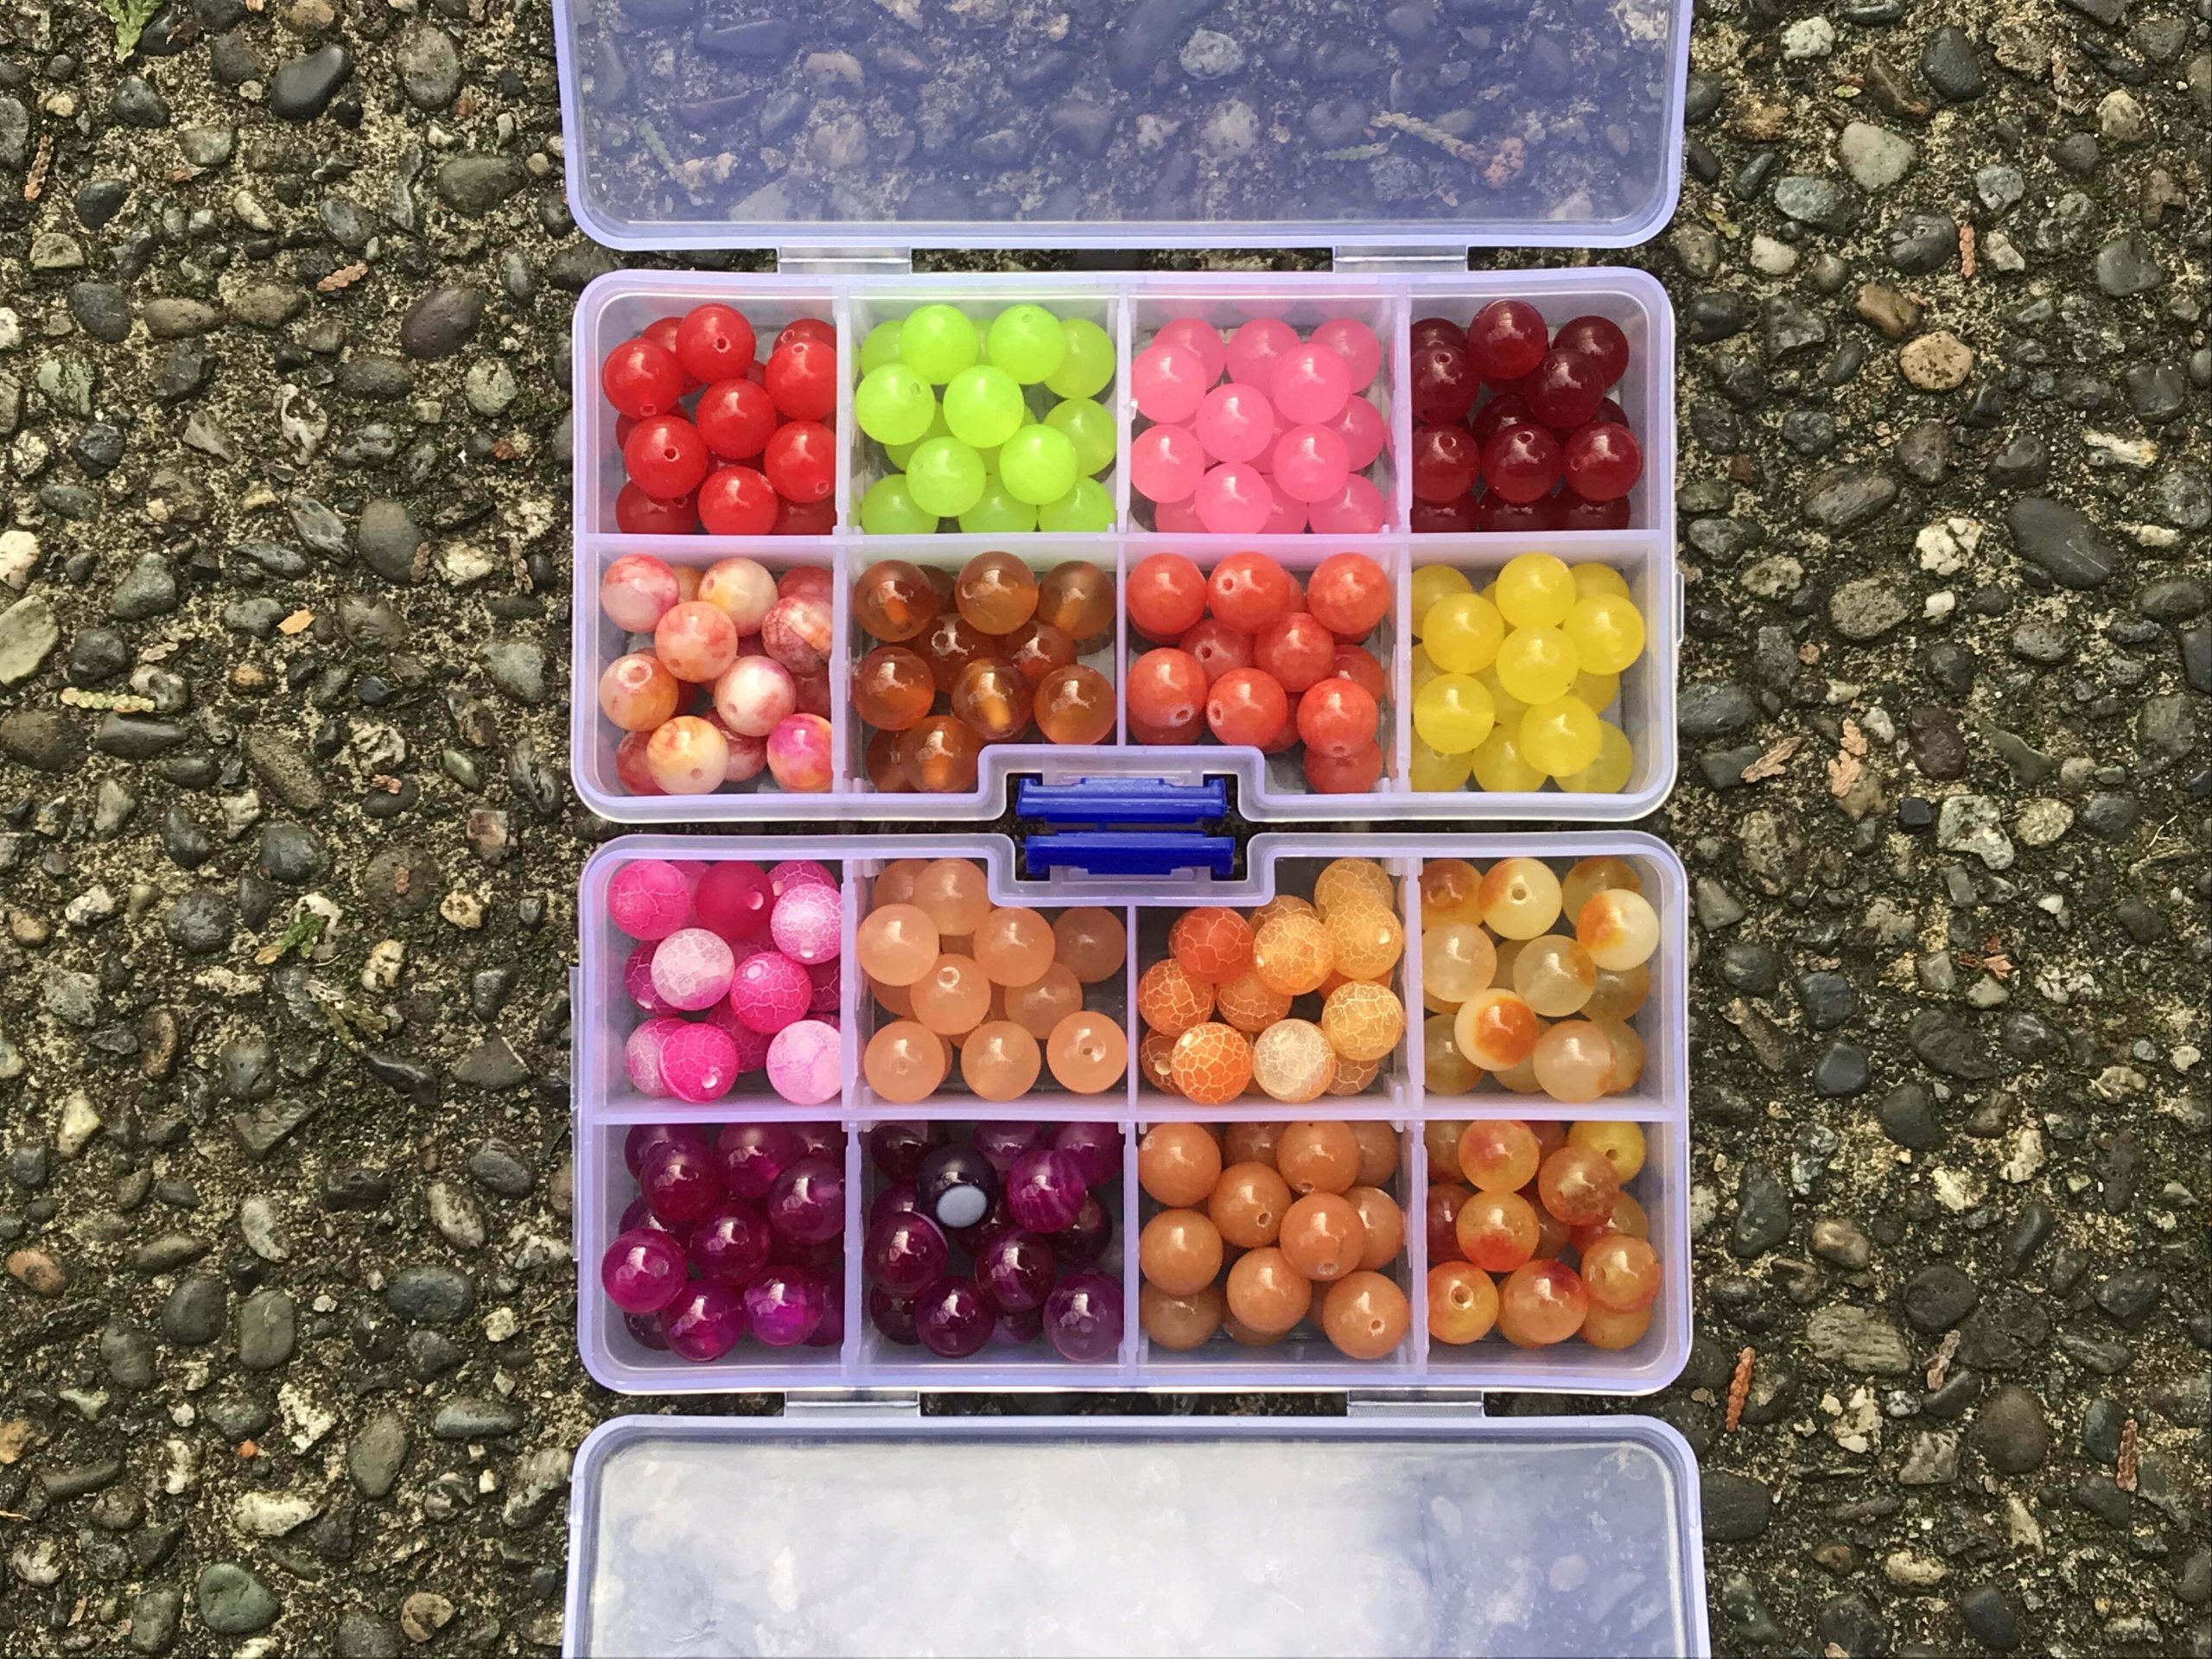 8 Color - 120 Count - 10mm Fishing Bead Combo Box Sets - Stone